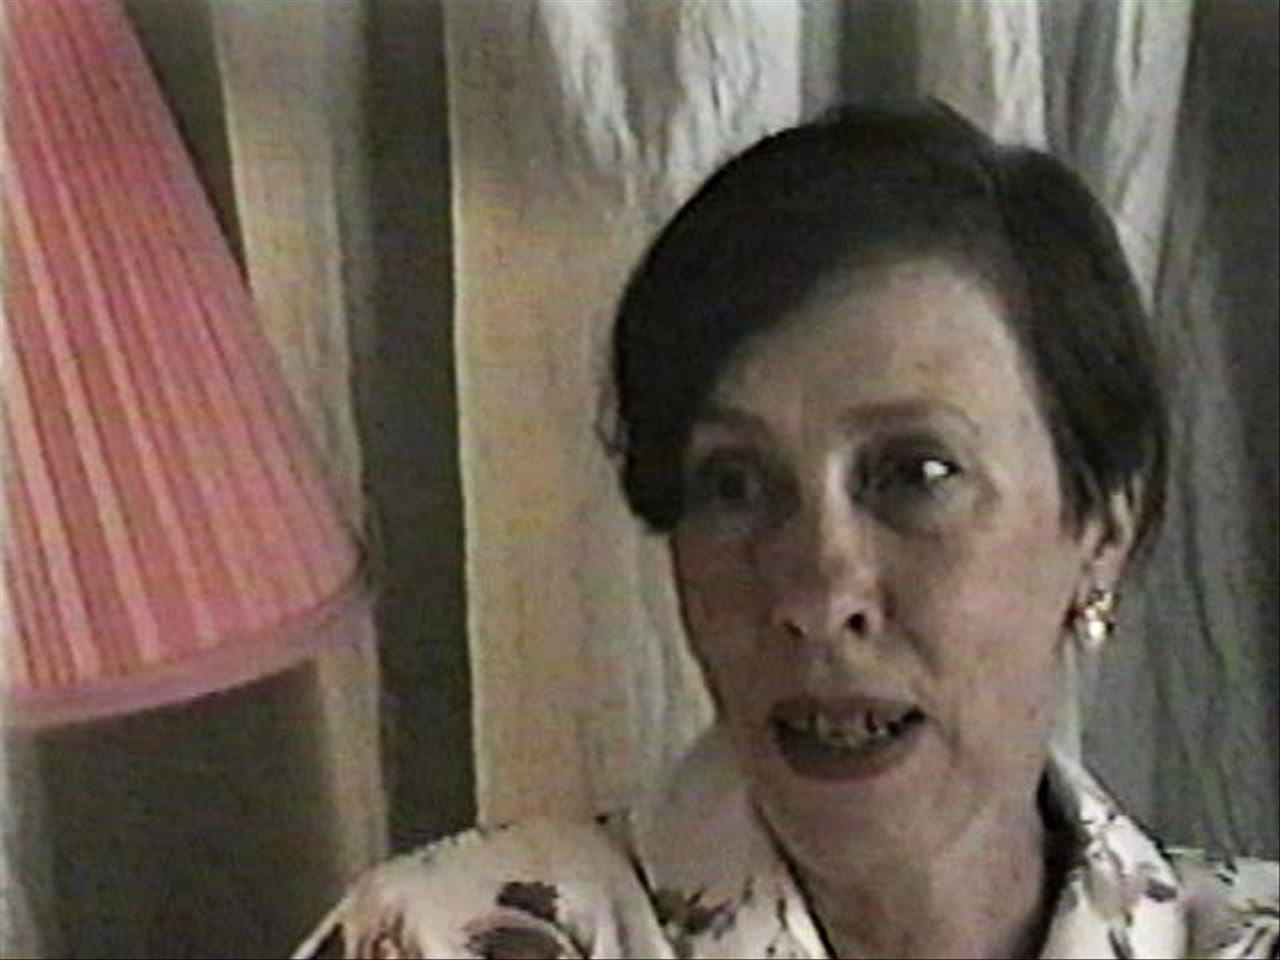 Medium shot of a woman speaking next to a lampshade